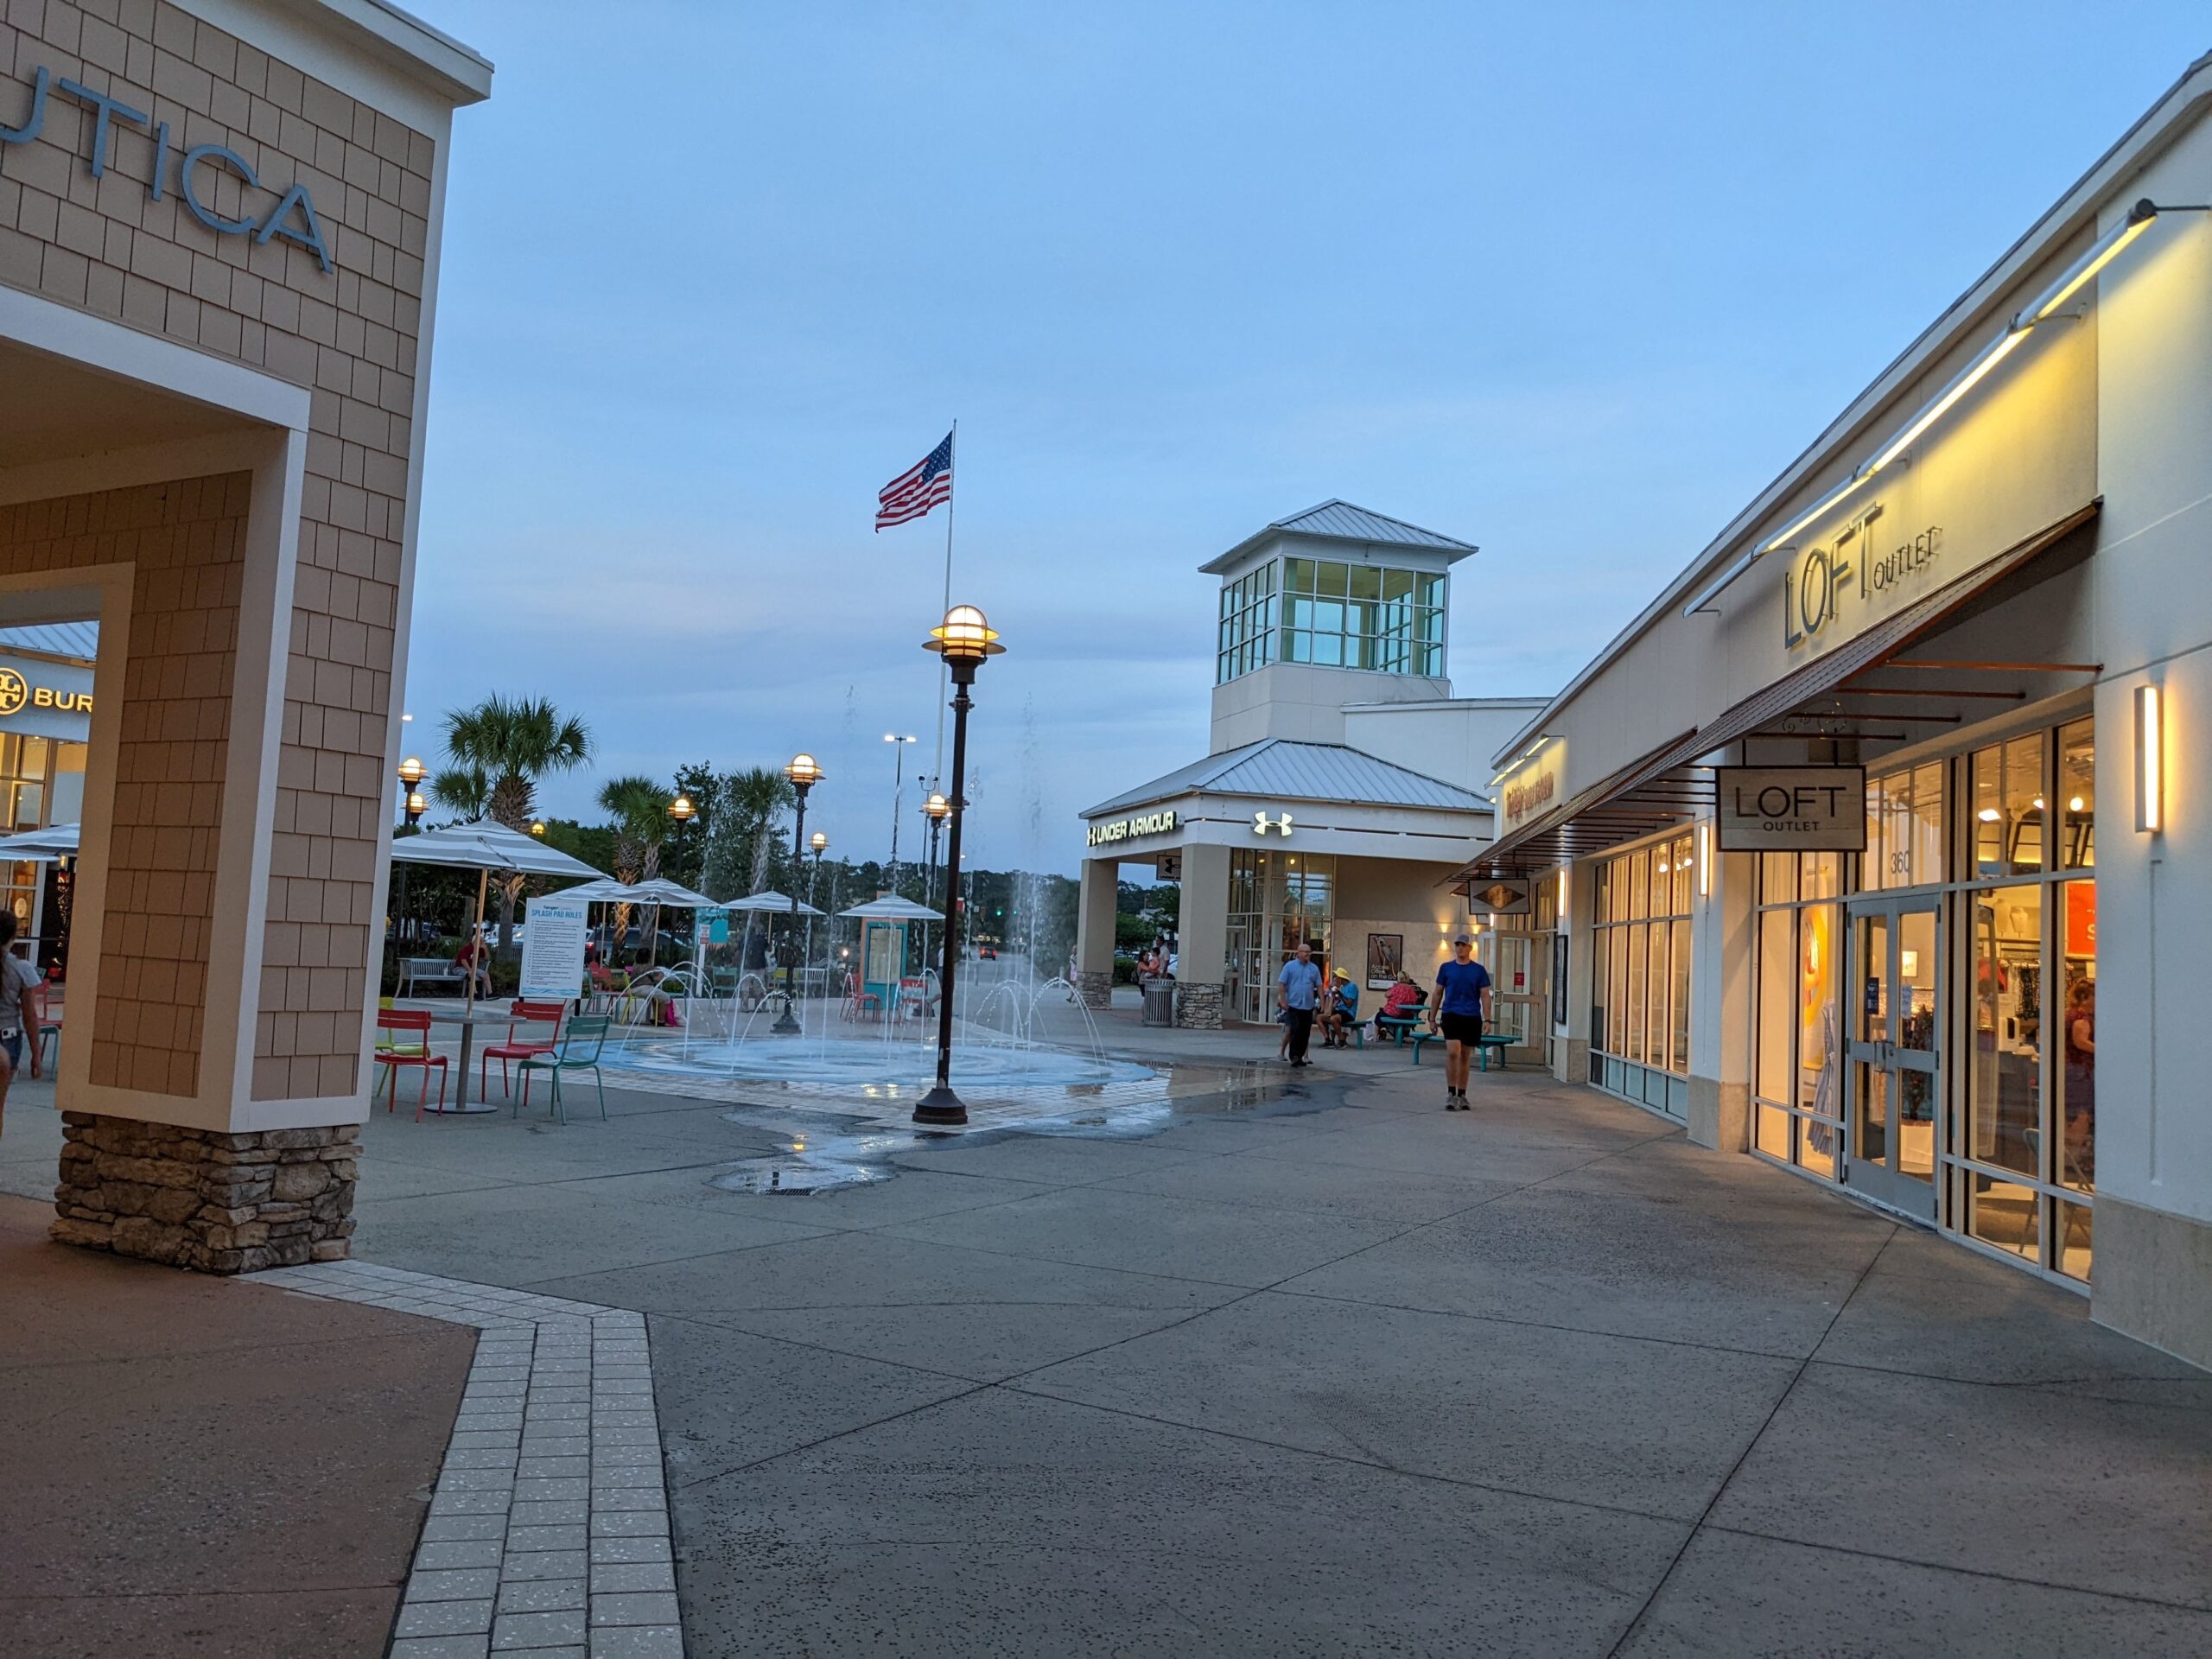 Tanger Outlets Myrtle Beach Hwy 17